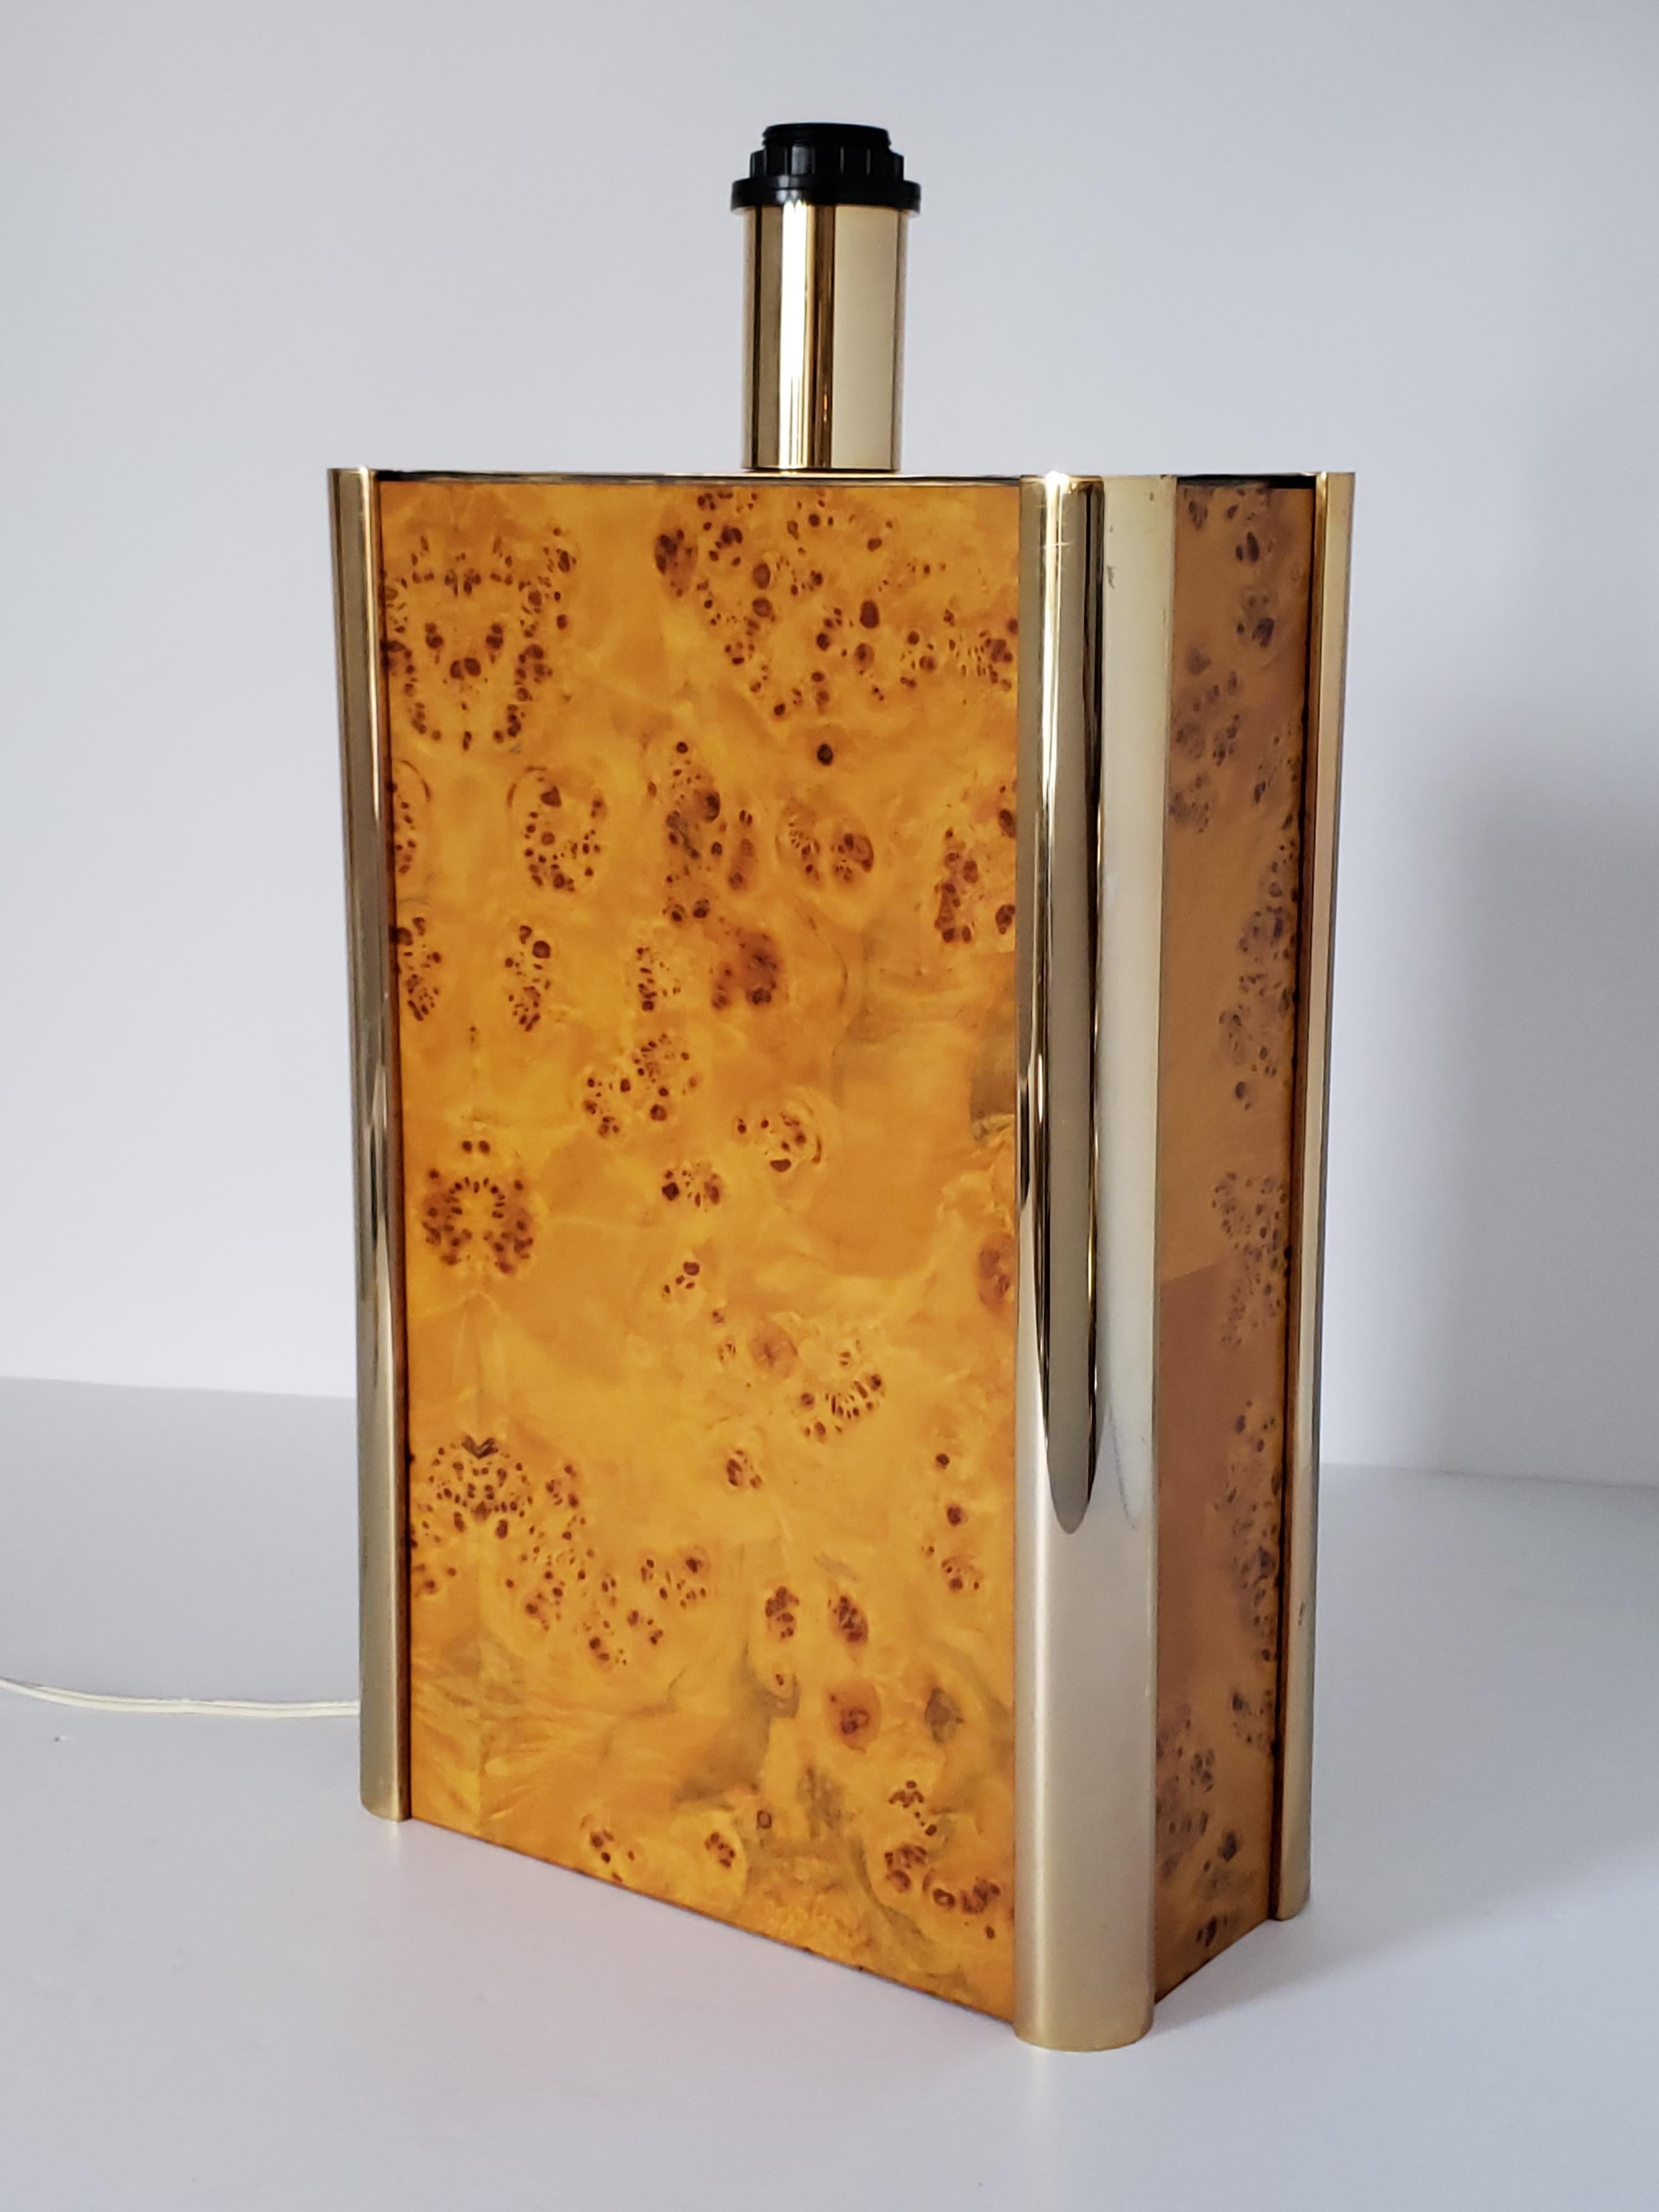 22 inches tall burl wood and brass table lamp.  

Contain one E26 socket rated at 100 watt.

Switch on cord. 

